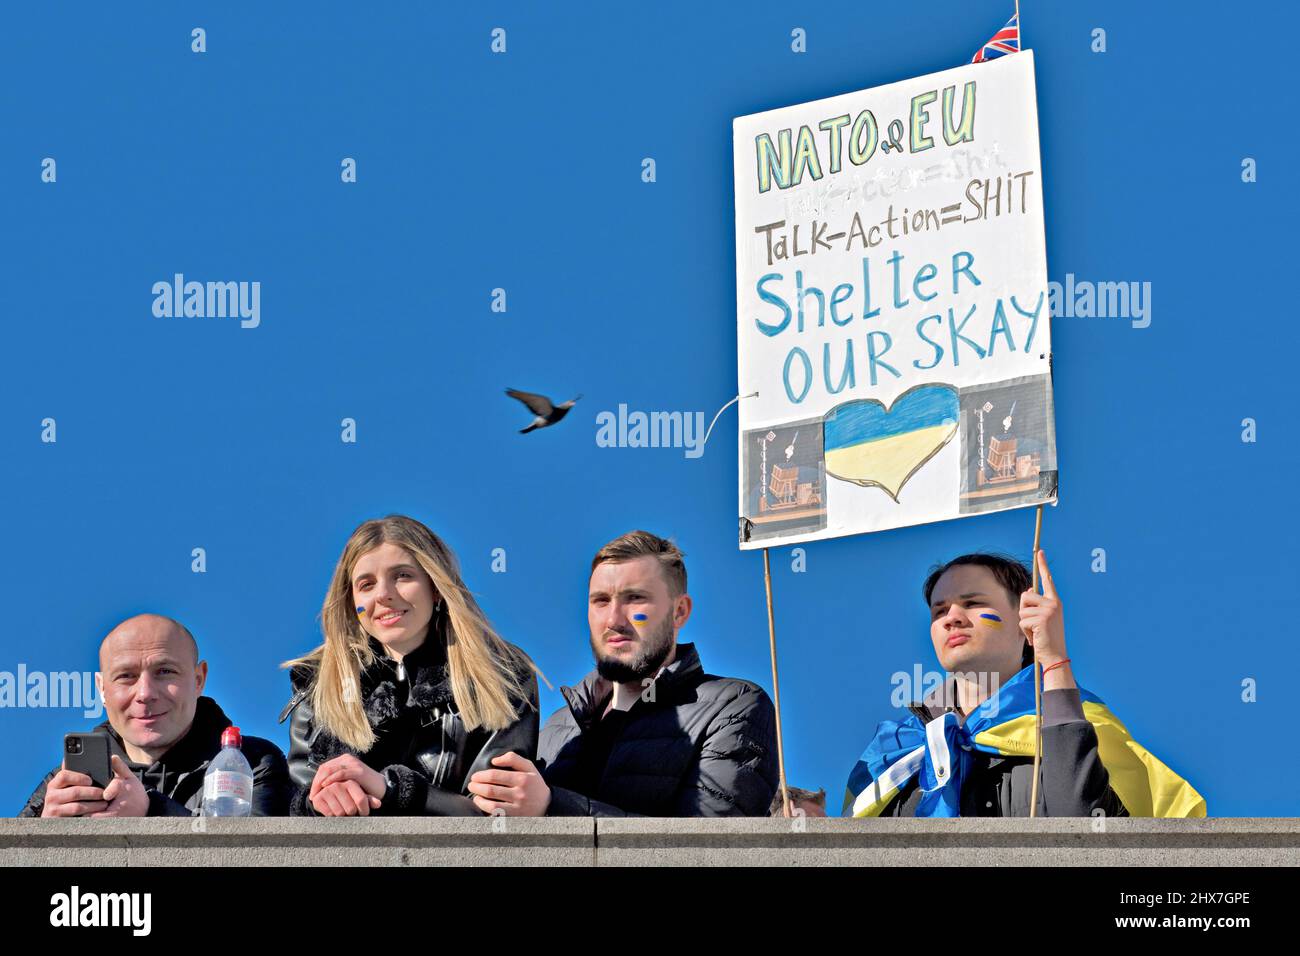 Activists hold a banner complaining about lack of action by NATO during the 2022 Russian invasion of Ukraine. They were part of a large solidarity rally in London against the Russian invasion of Ukraine 27 February 2022 Stock Photo